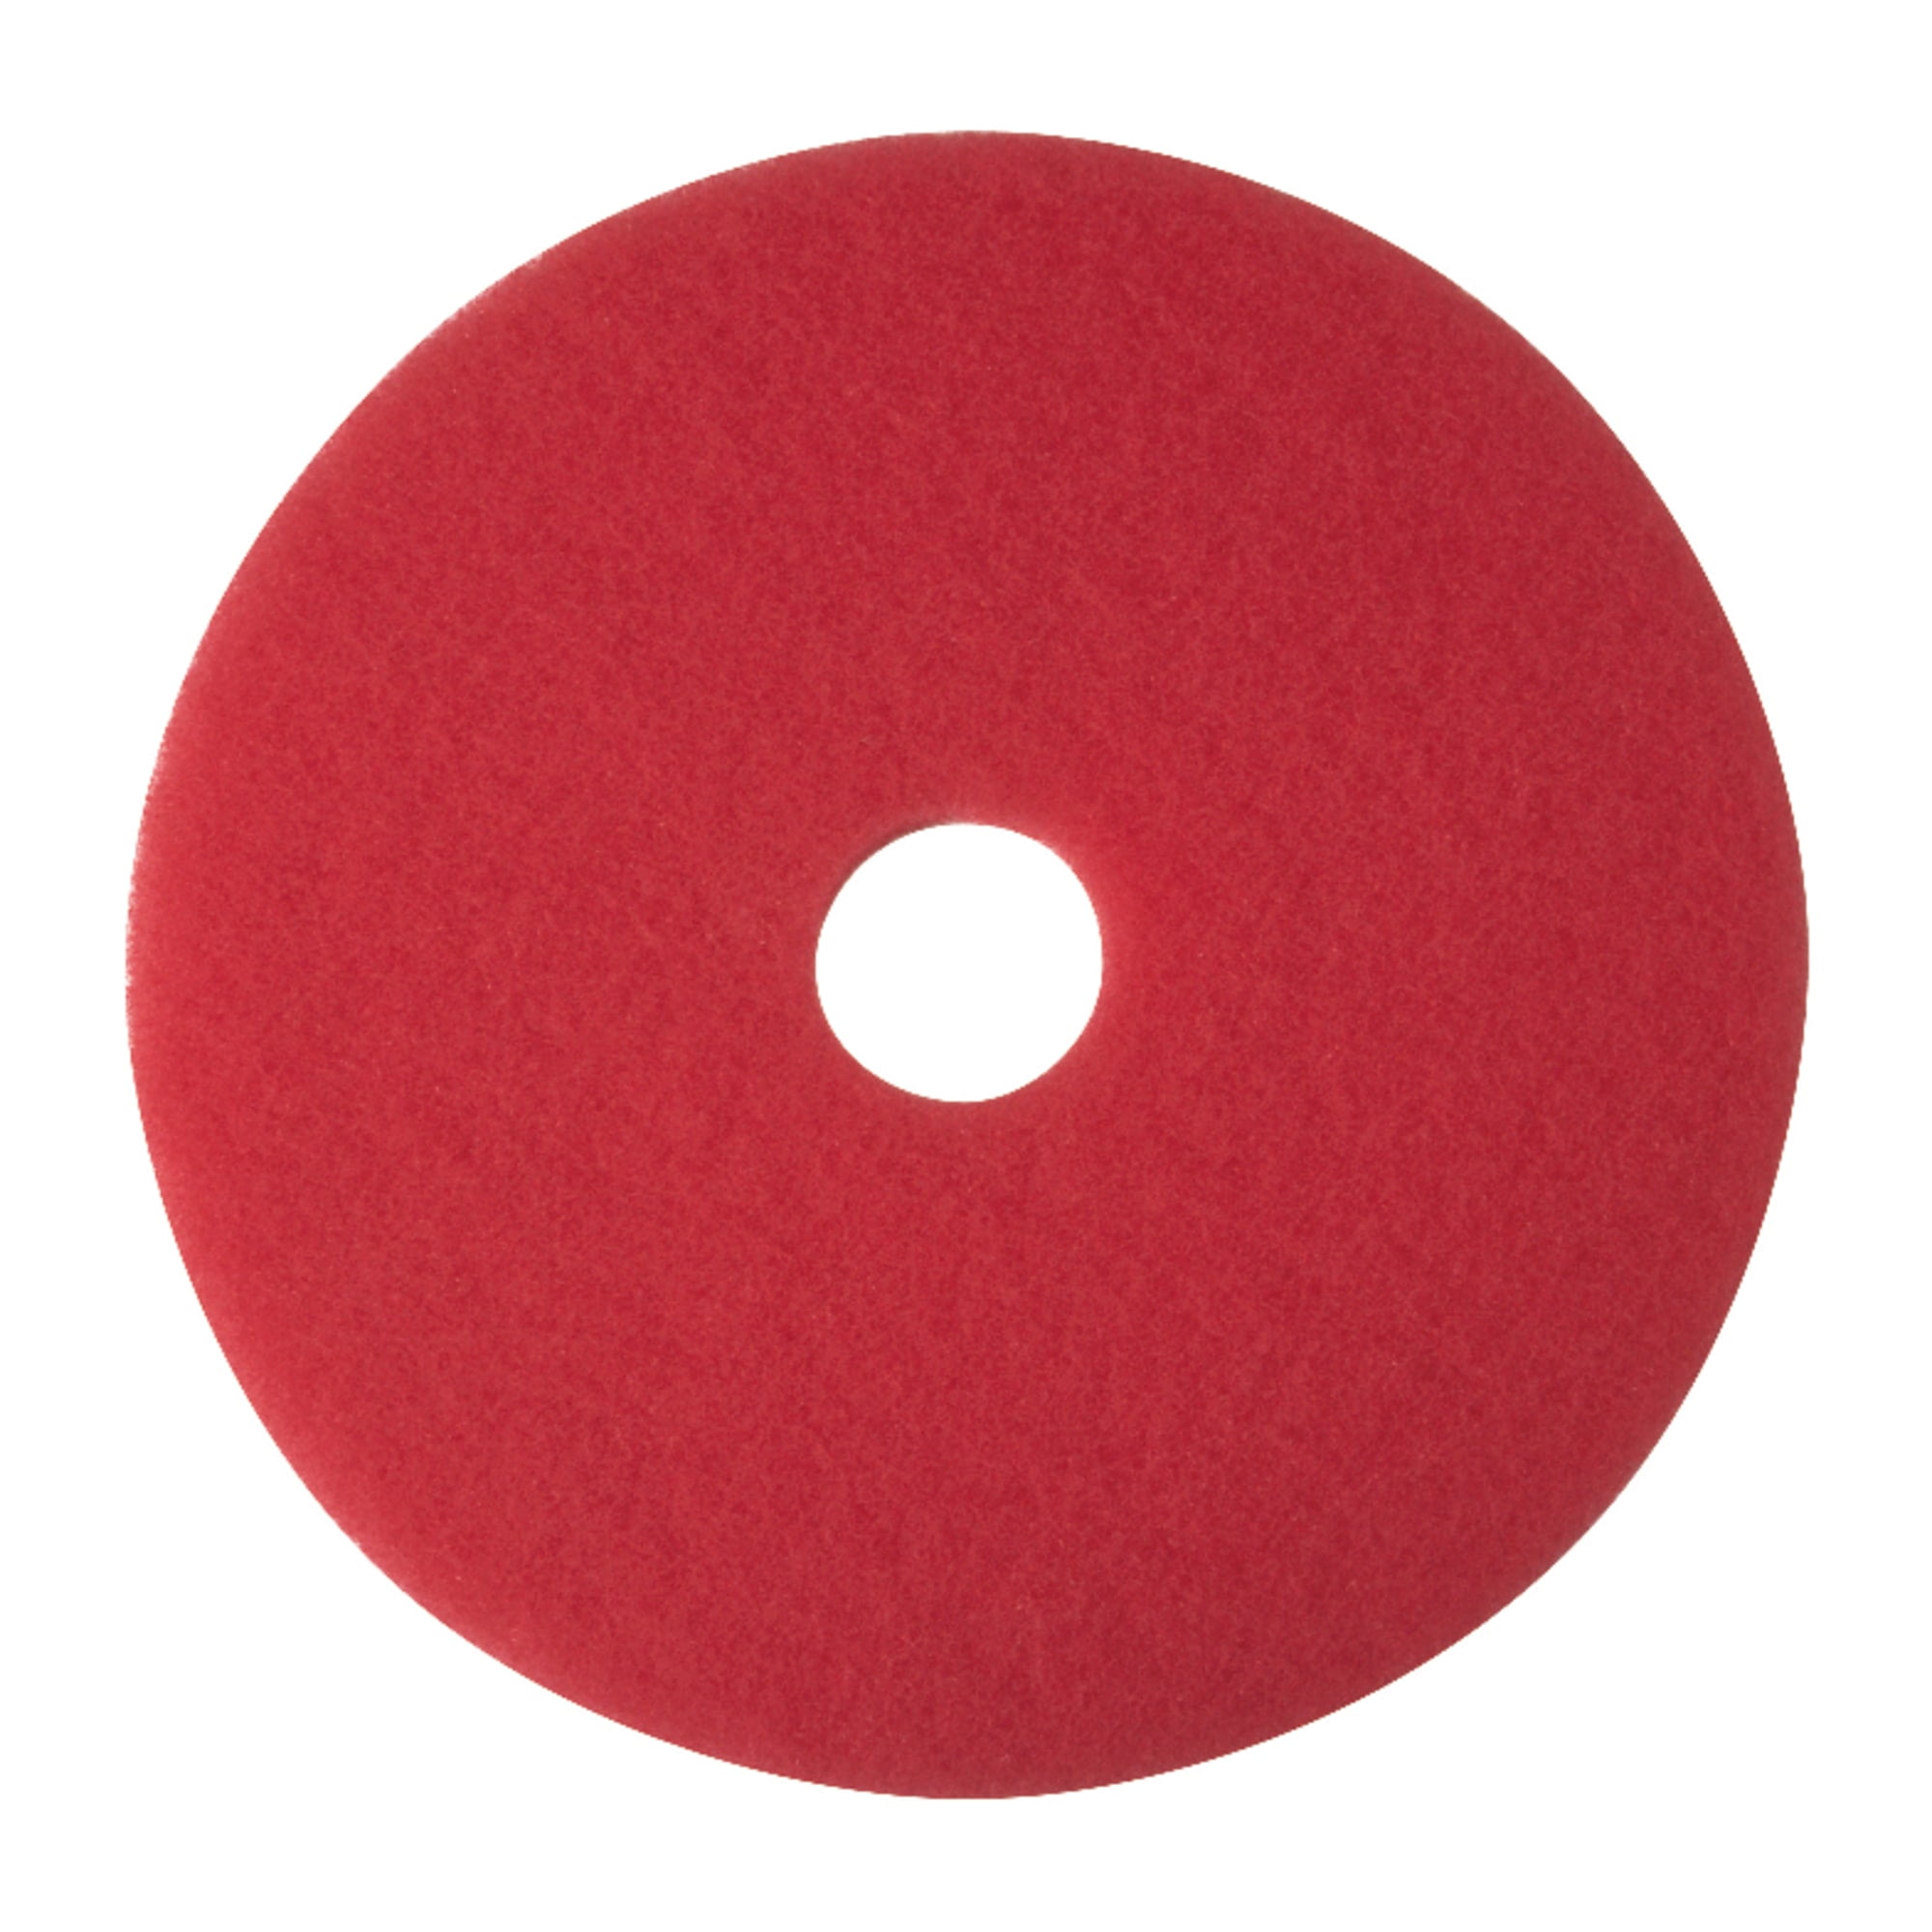 13" RED 5100 BOX OF 5 FLOOR BUFFING/BUFFER PADS 175-600 RPM'S 3M SCOTCH-BRITE 